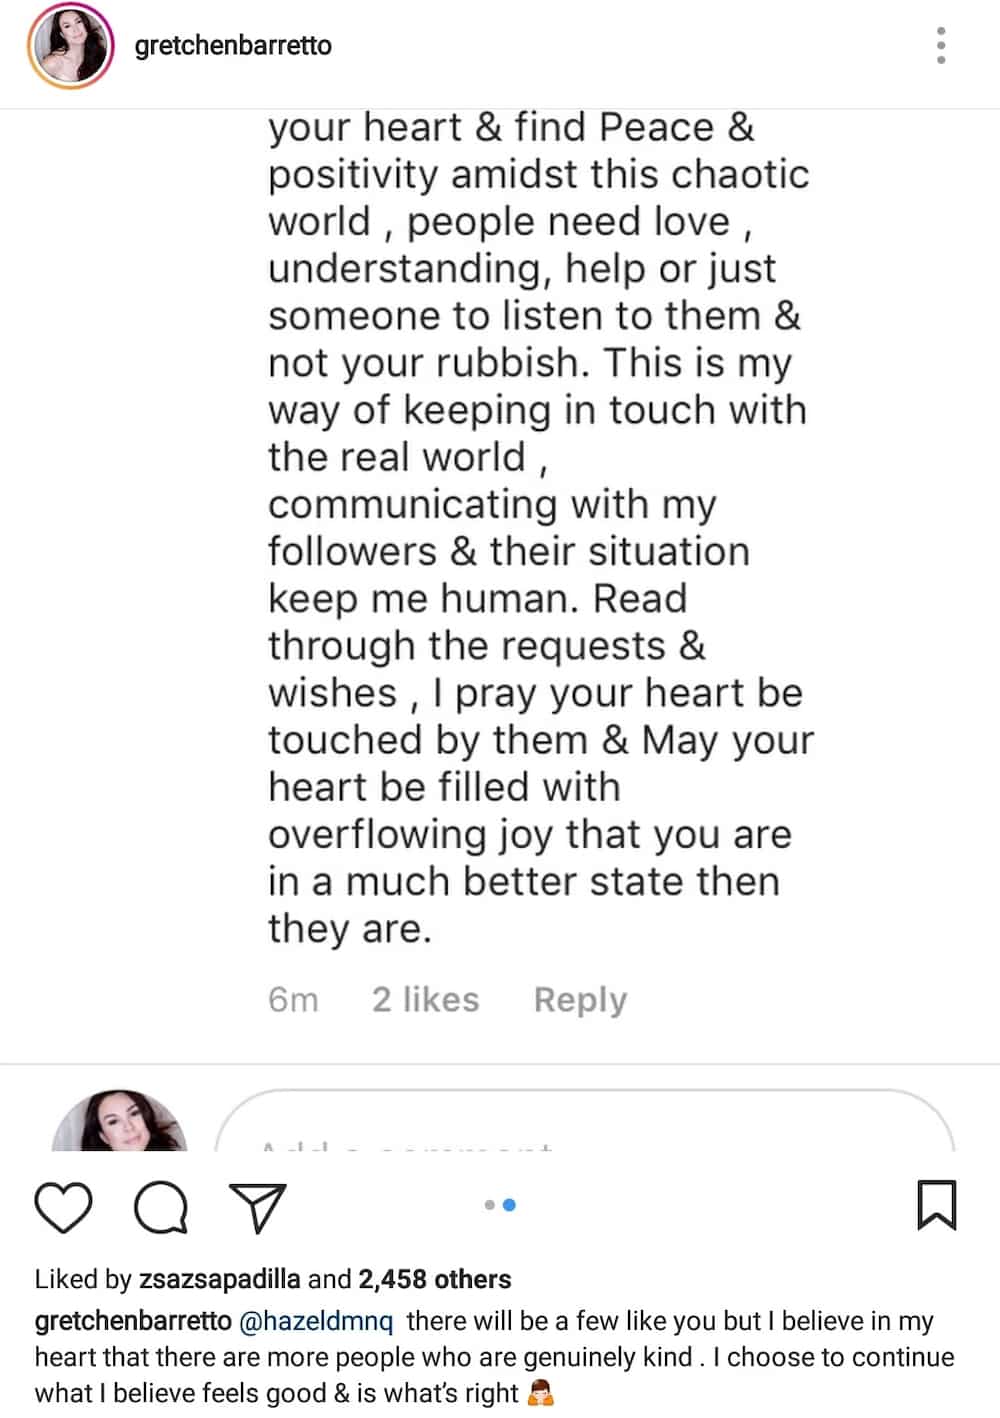 Gretchen Barretto's classy response to a netizen questioning the sincerity of her gift-giving